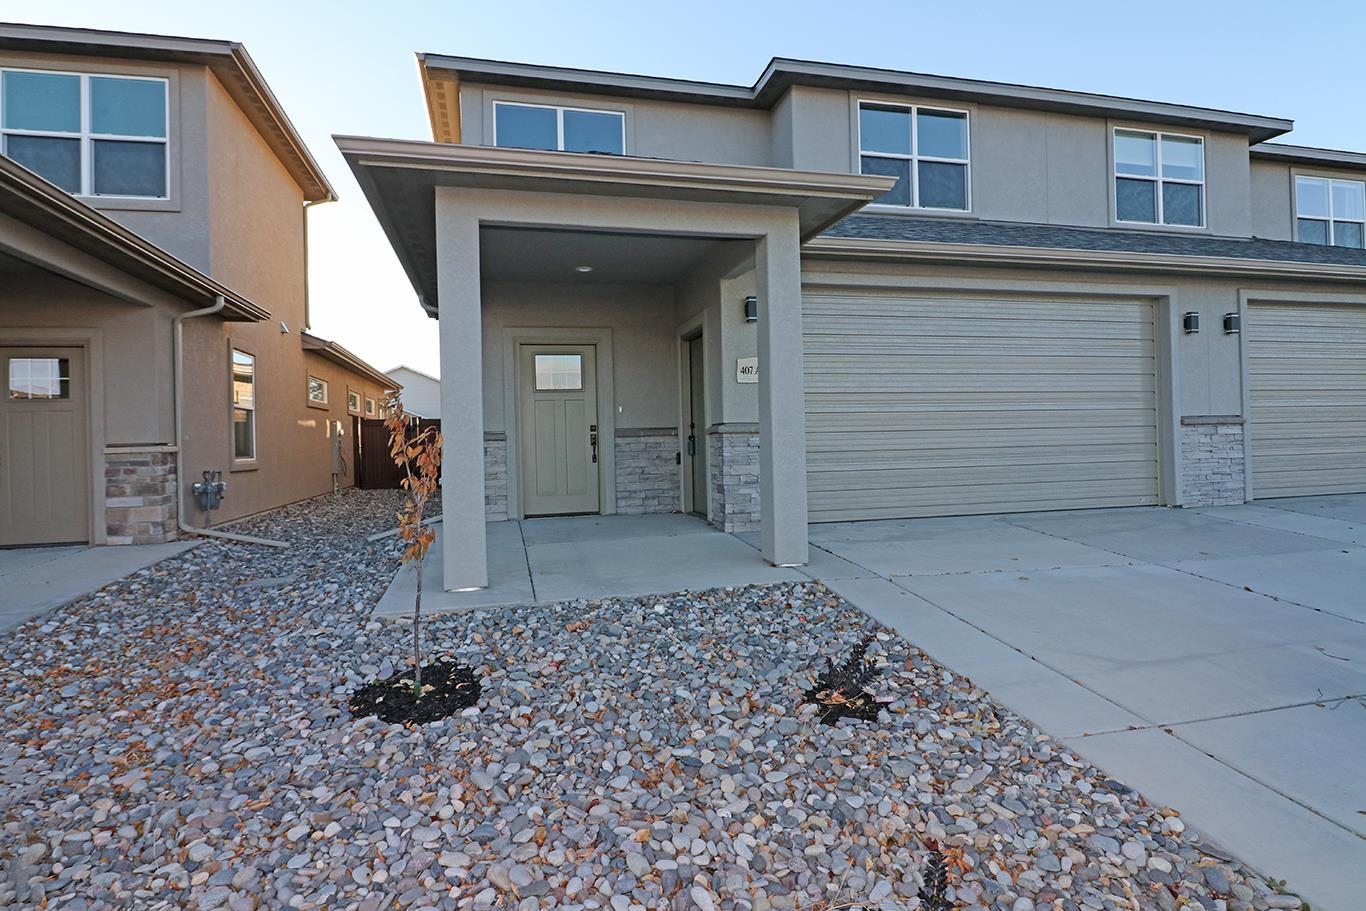 Brand New Townhome by MTB Homes with $8K seller contribution to permanent interest rate buy down and 1% in closing costs through Seller’s preferred lender (call for details).! Master on the main with 2nd living space & 2 addl beds & bath upstairs - rare find in this price range!  Full stainless appliance package, LVT in main level living areas, Granite counters throughout, all showers are tiled (no inserts), glass euro shower door in master bath. Light, bright, spacious home with extra windows, high ceilings, ceiling fans in all bedrooms. Fencing and xericape landscaping w/ domestic water drip system included. Buy adjacent twnhme & live in one while renting the other! Easy access to I-70, Hwy 50 and downtown GJ! HOA only $100/year. Virtual tour is of a similar unit and finishes may be slightly different. Don't wait on interest rates to come down - afford the home you want now using the Builder Advantage Program! Call for details.